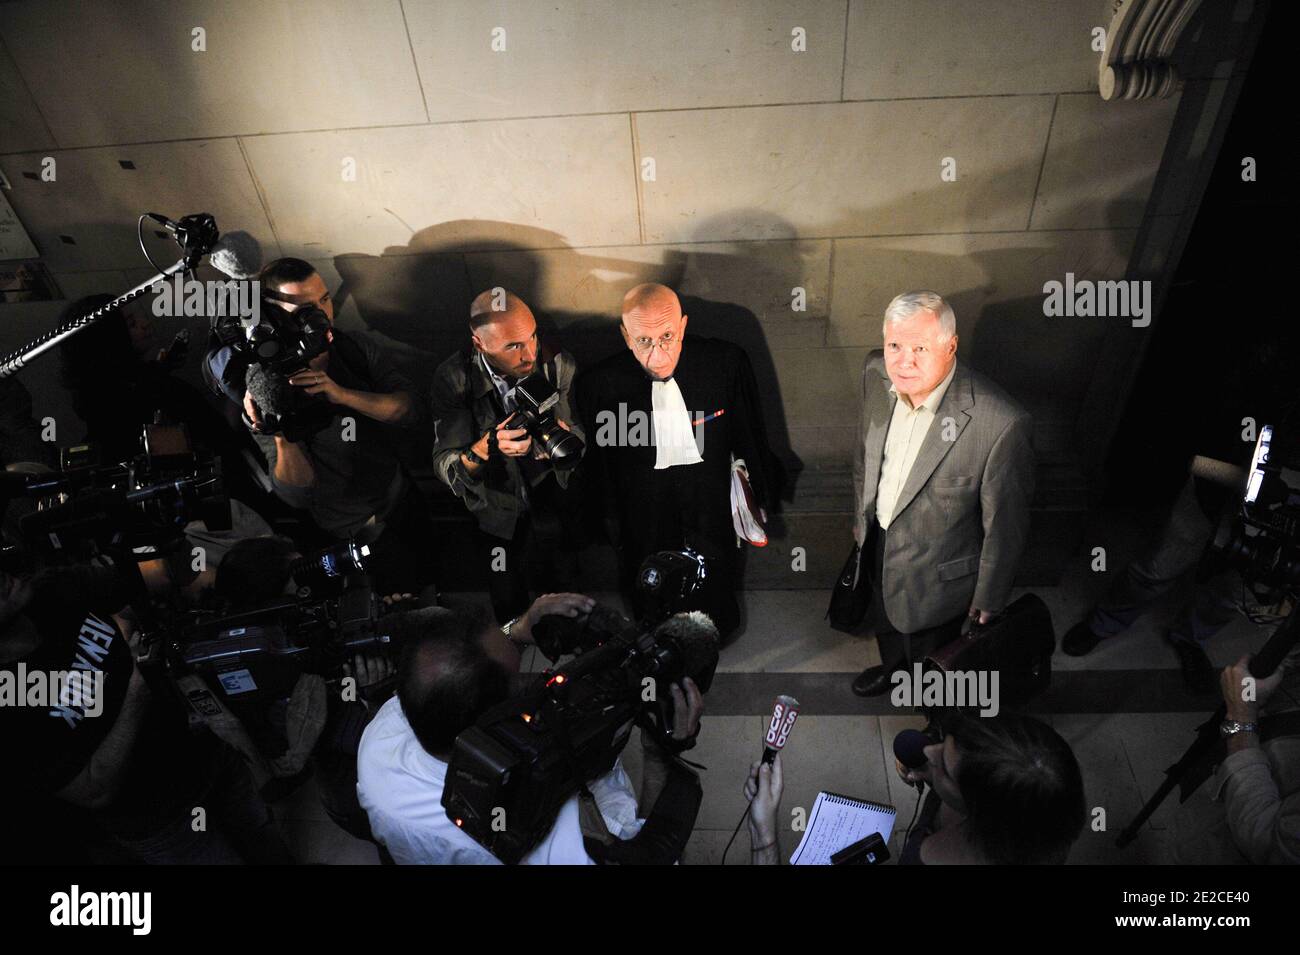 Frenchman Andre Bamberski arrives with his lawyers at the Palais de Justice for German cardiologist Dieter Krombach's trial for the murder of Kalinka Bamberski, in Paris, France on October 4, 2011. The French court today decided to continue the trial of the German doctor, who is accused of having raped and killed his then 14-year-old stepdaughter, Kalinka Bamberski, in the summer of 1982 while she was holidaying with her mother at Krombach's home at Lake Constance, southern Germany. A court in Germany ruled that Krombach could not be held responsible for the death, but in 1995 a court in Paris Stock Photo